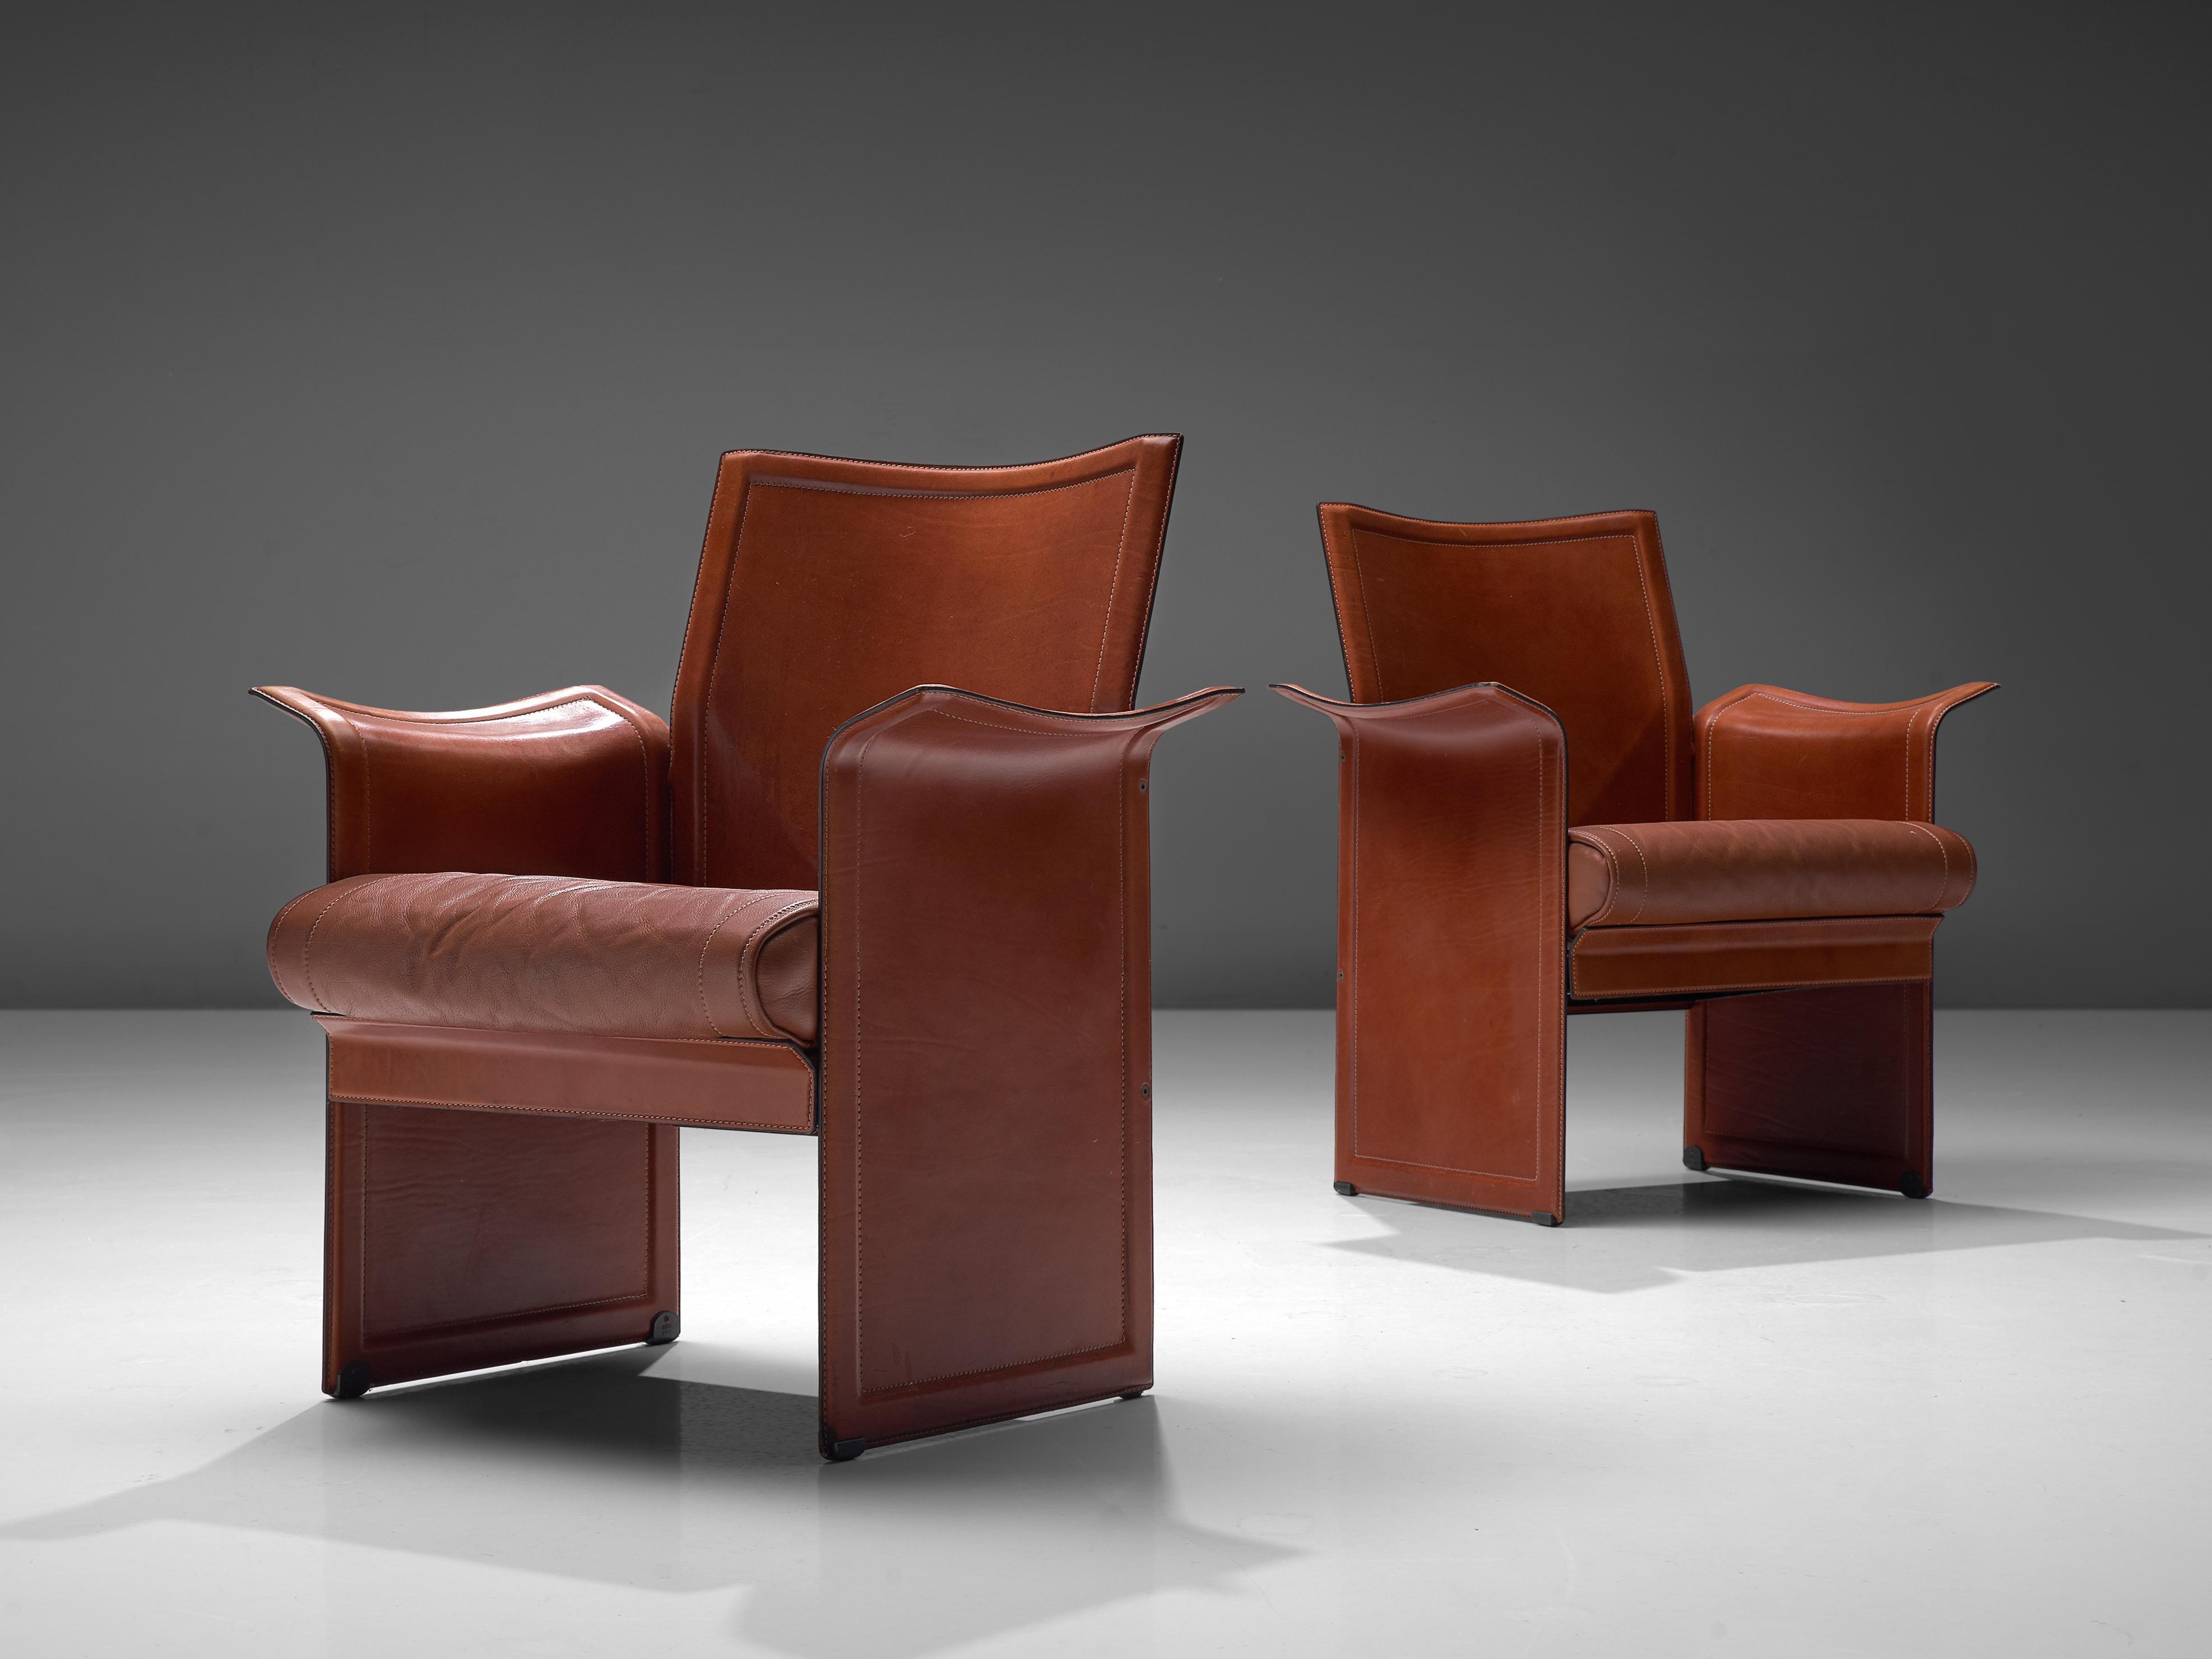 Tito Agnoli for Matteo Grassi, set of two 'Korium' chairs, leather, metal, Italy, 1970s.

These sophisticated and iconic 'Korium' leather chairs were designed by Tito Agnoli for Matteo Grassi. The design features a strong structure, with a wing